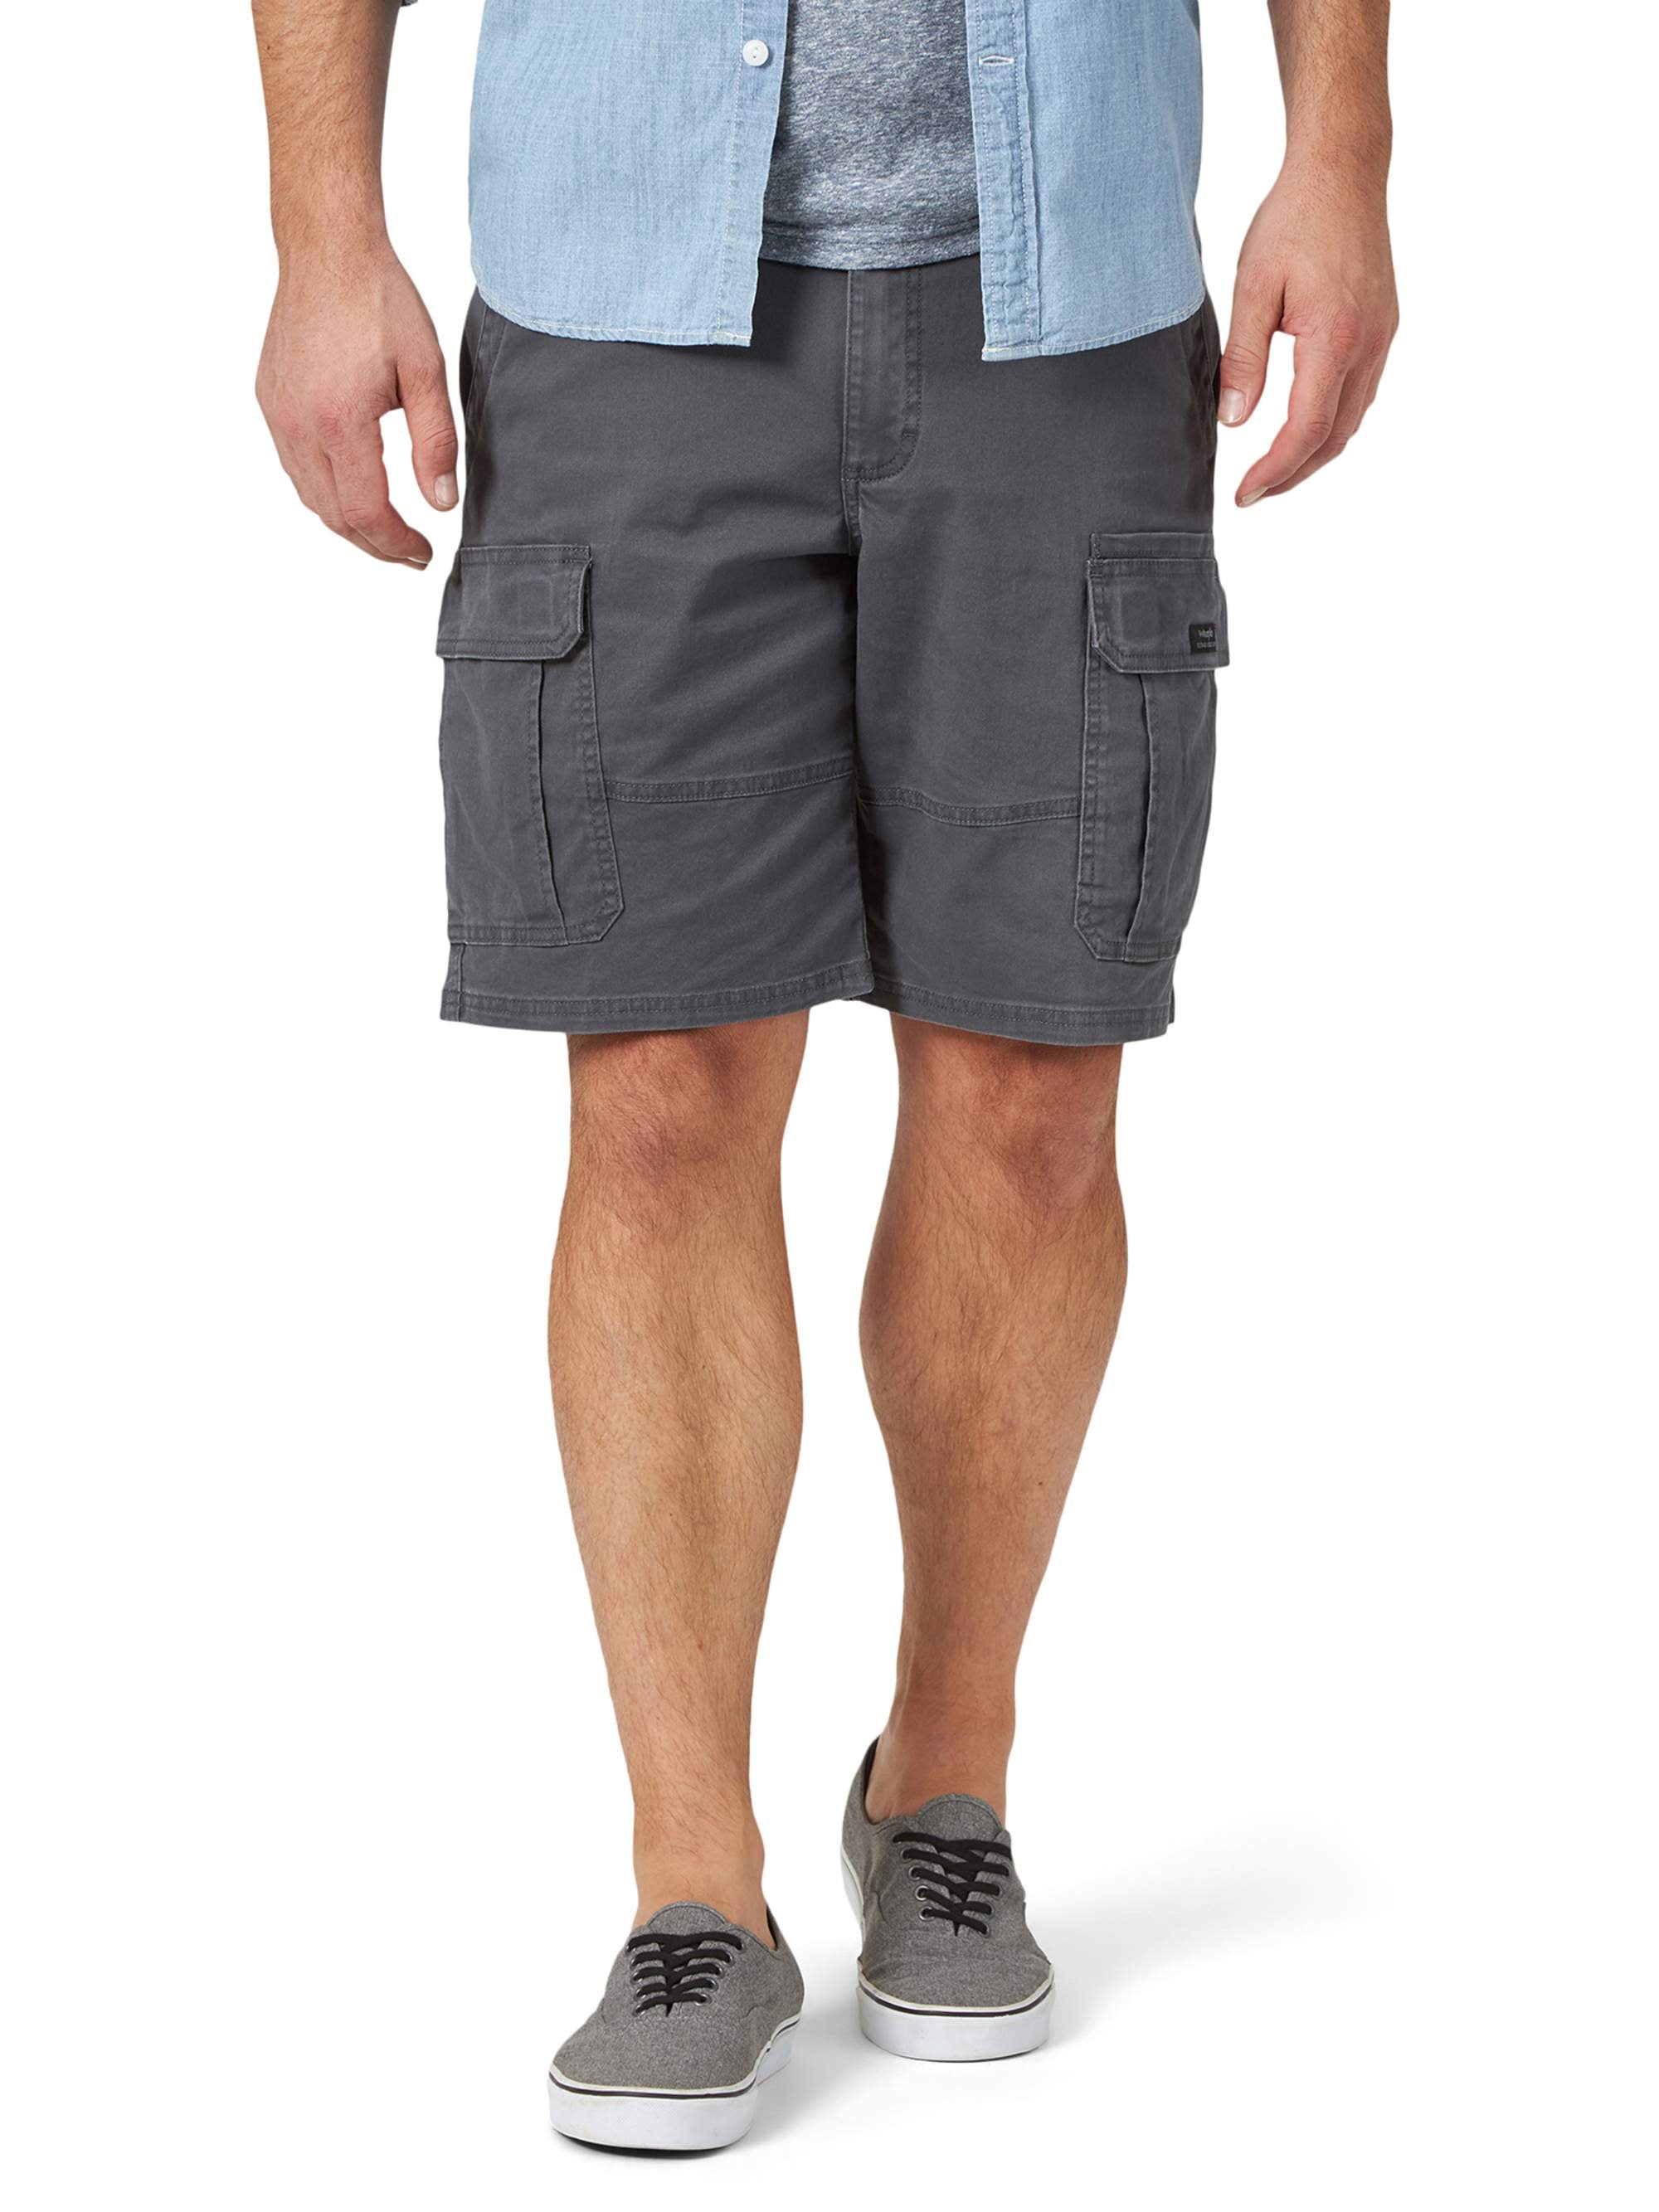 Wrangler Cargo Shorts 30 x 10 Relaxed Fit Gray Plaid Tech Pocket Utility New